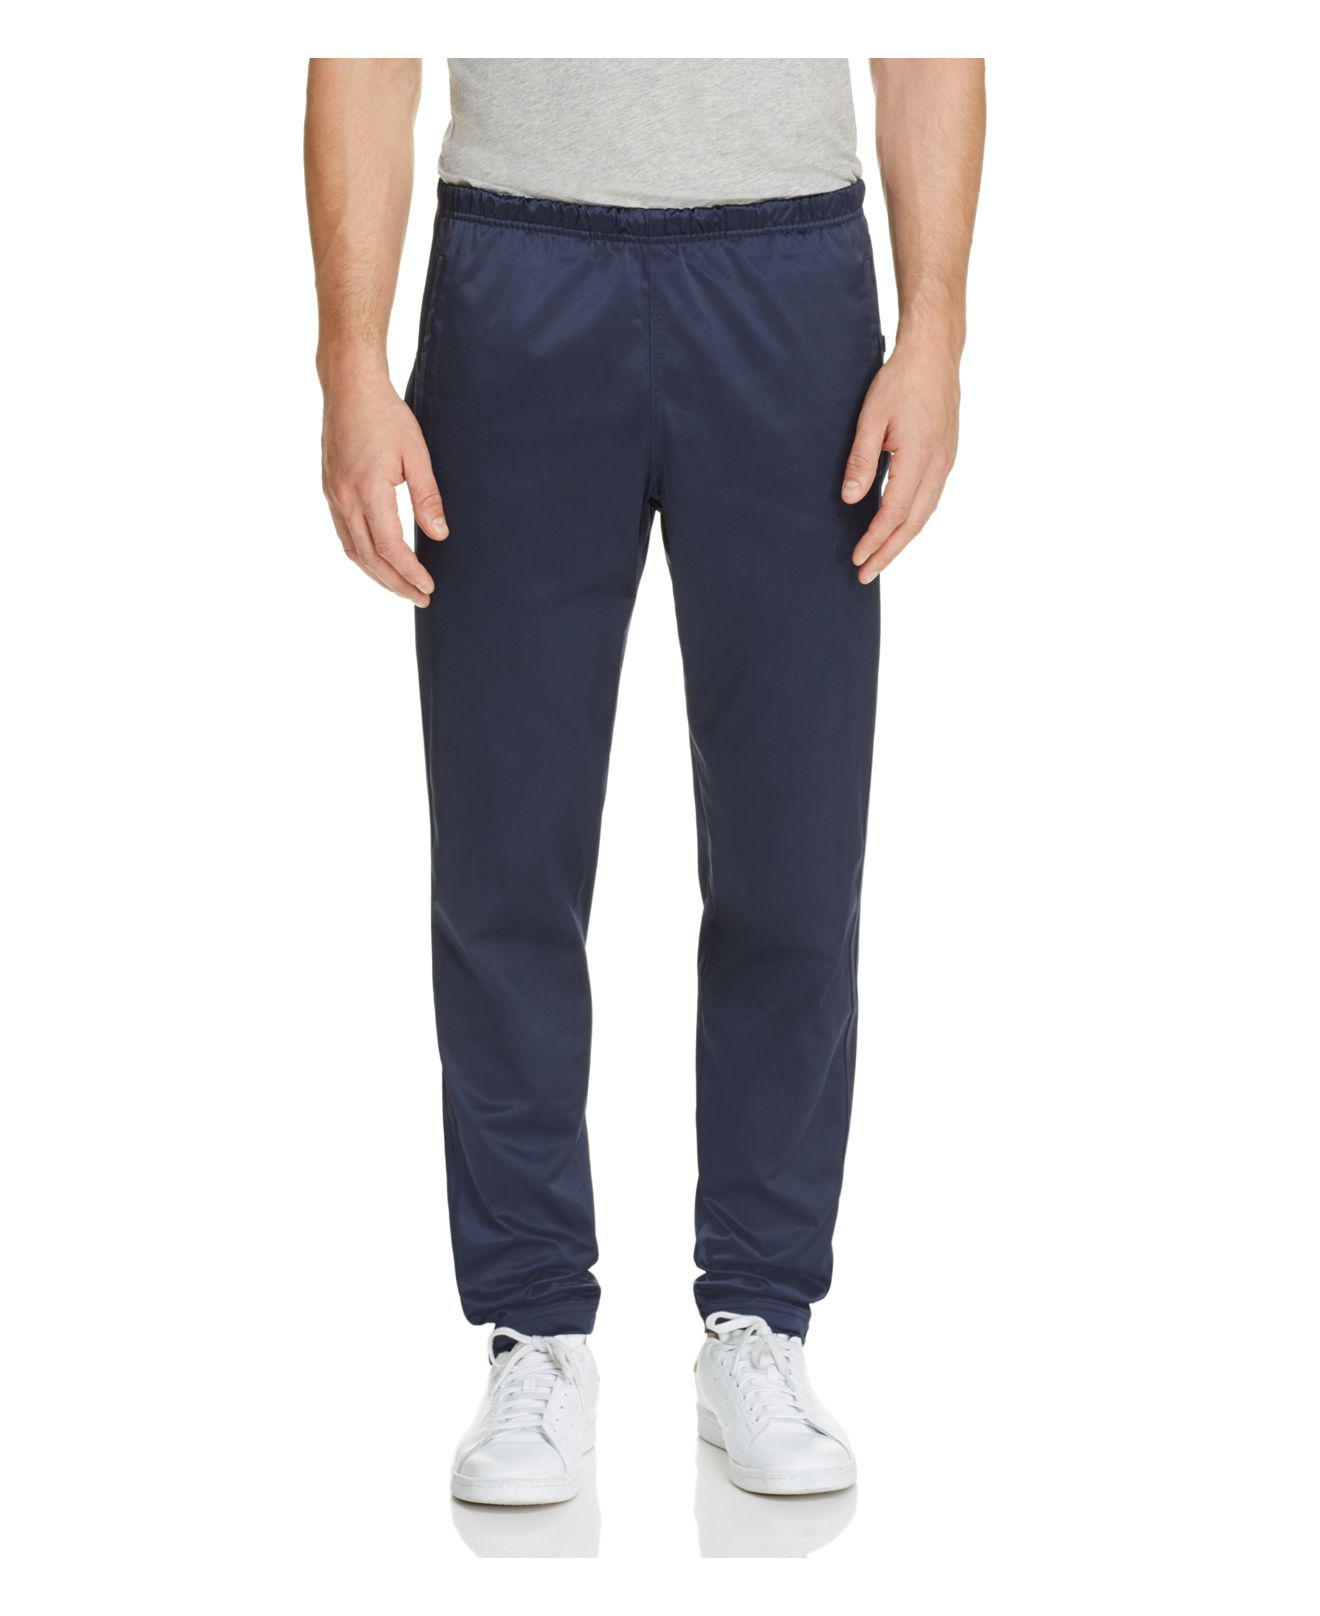 adidas Originals Synthetic Side Snap Track Pants in Blue for Men - Lyst